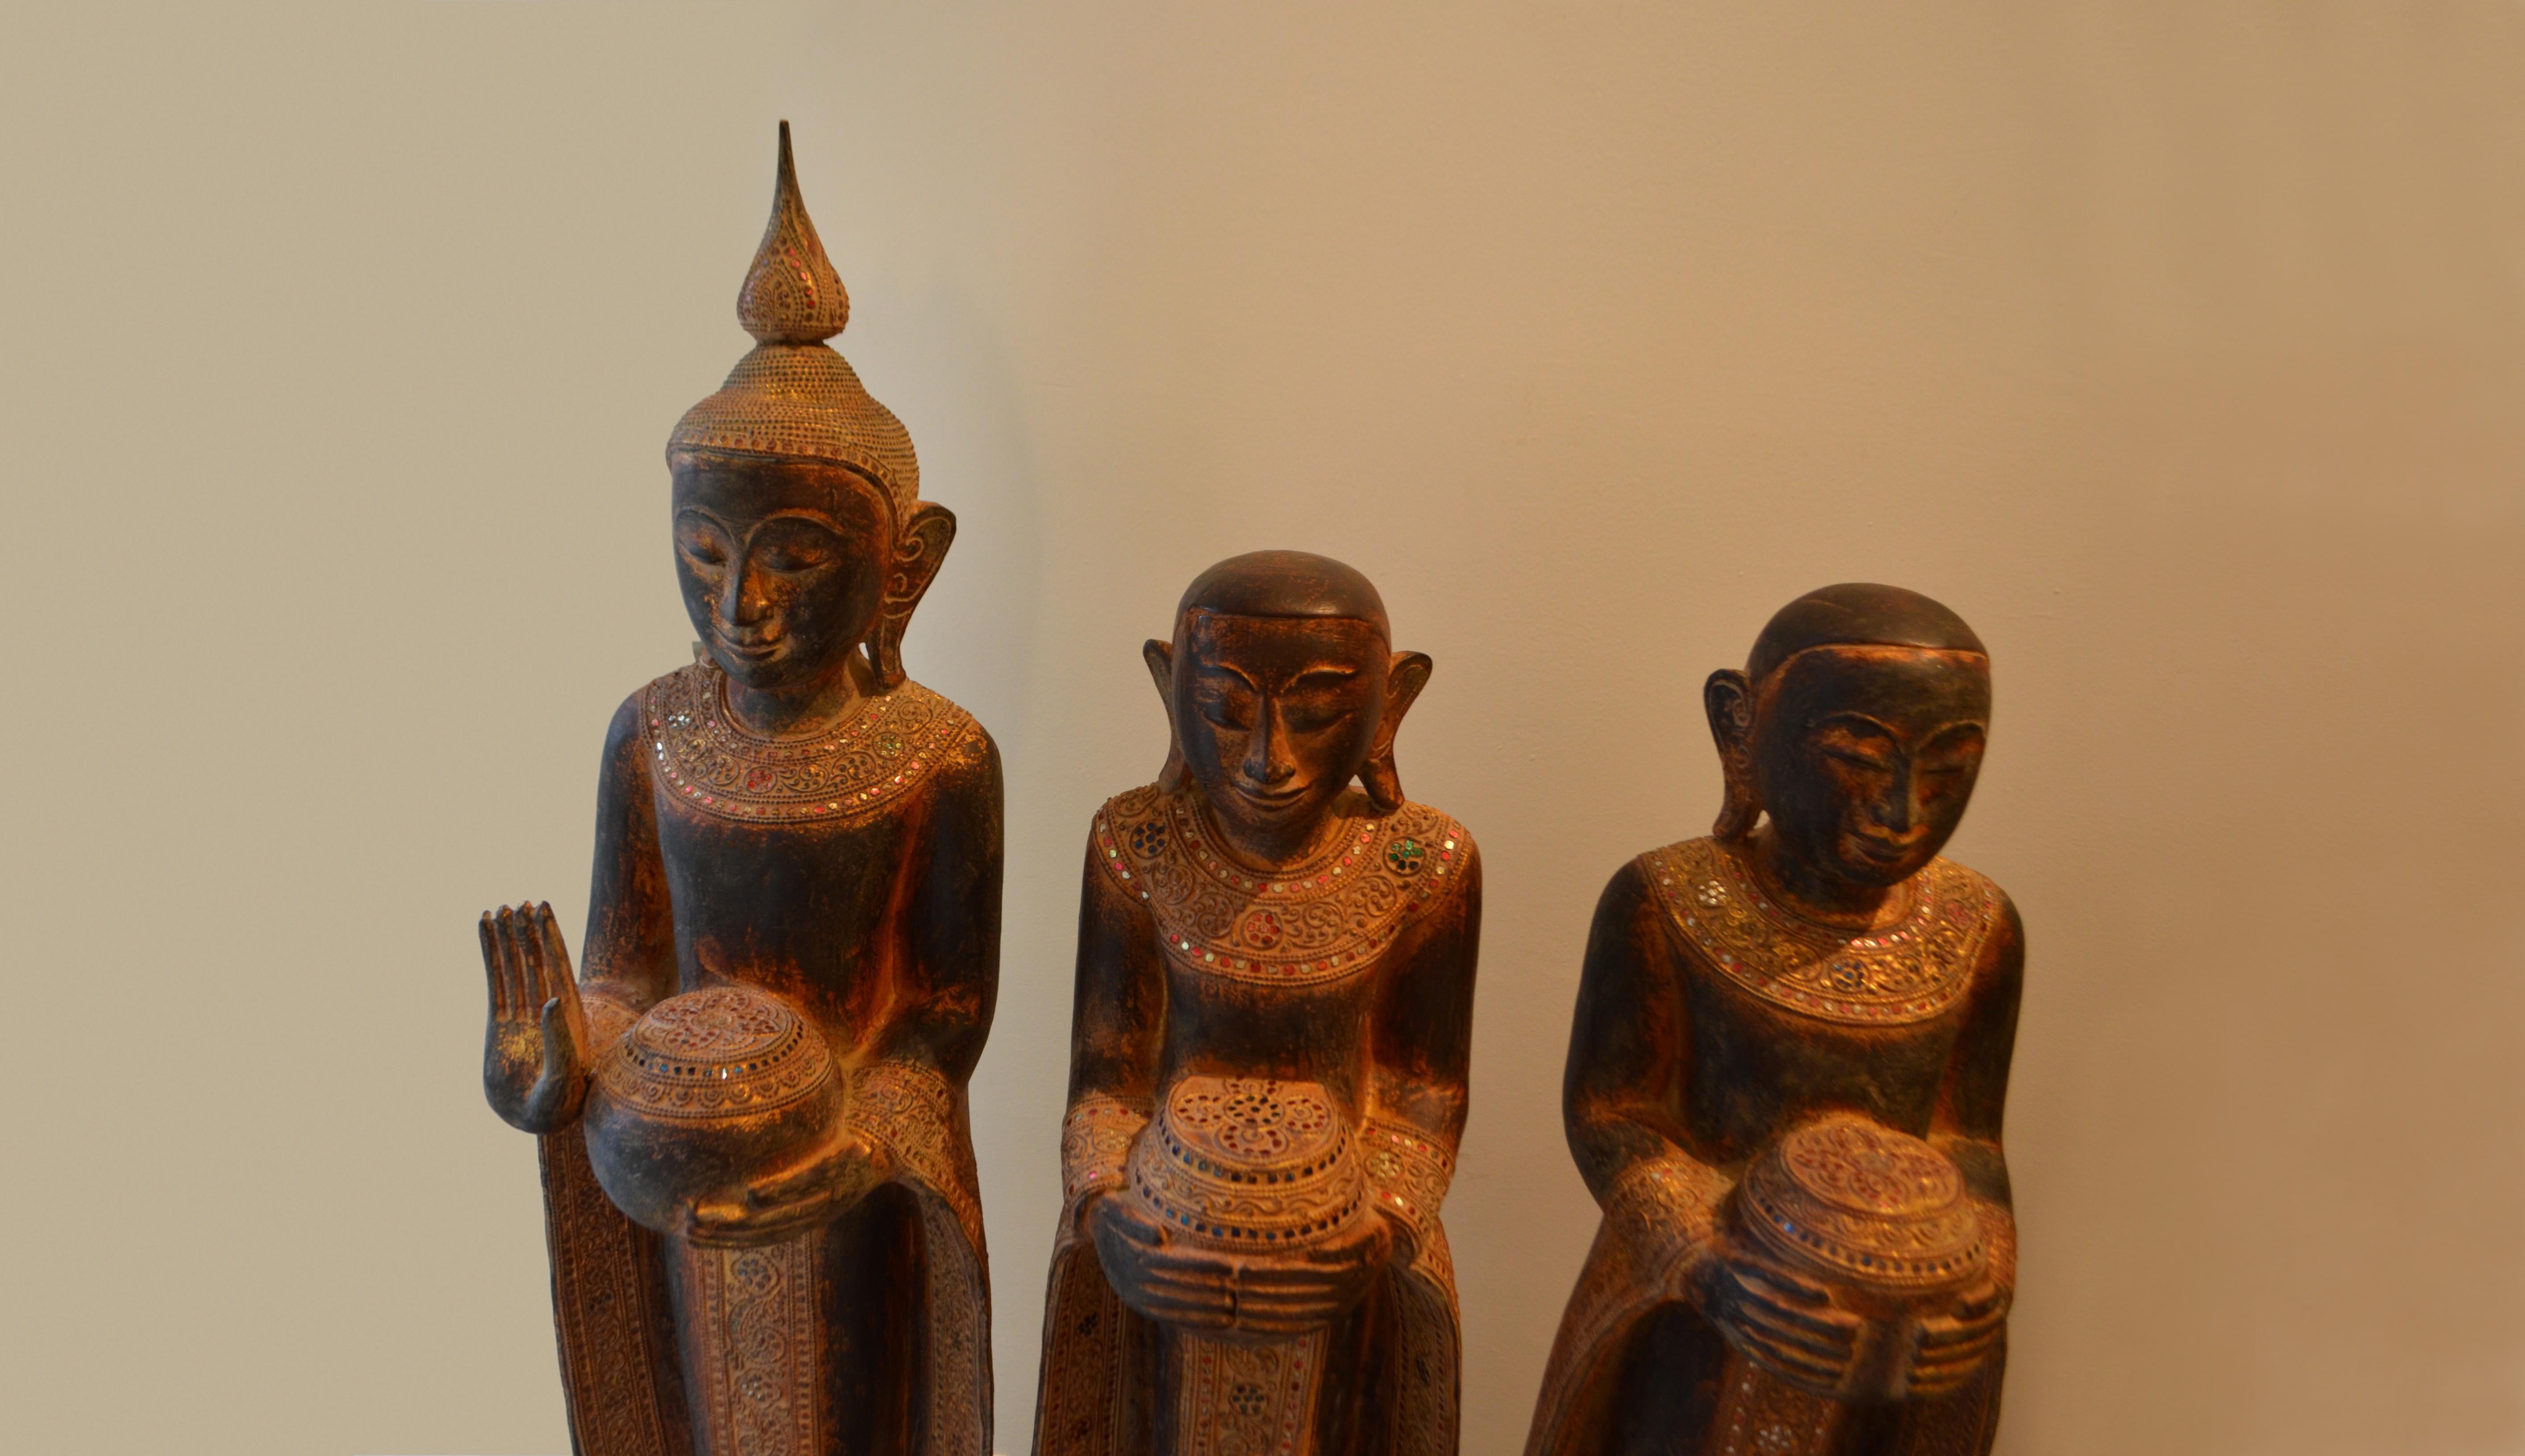 Set of six: Buddha and Buddhist Monk Statues from Burma/ Myanmar, circa 1940.

The statues represent the life of the Burmese Monks with their alms bowl as a symbolic connection to the spiritual realm and to show humbleness and respect in the